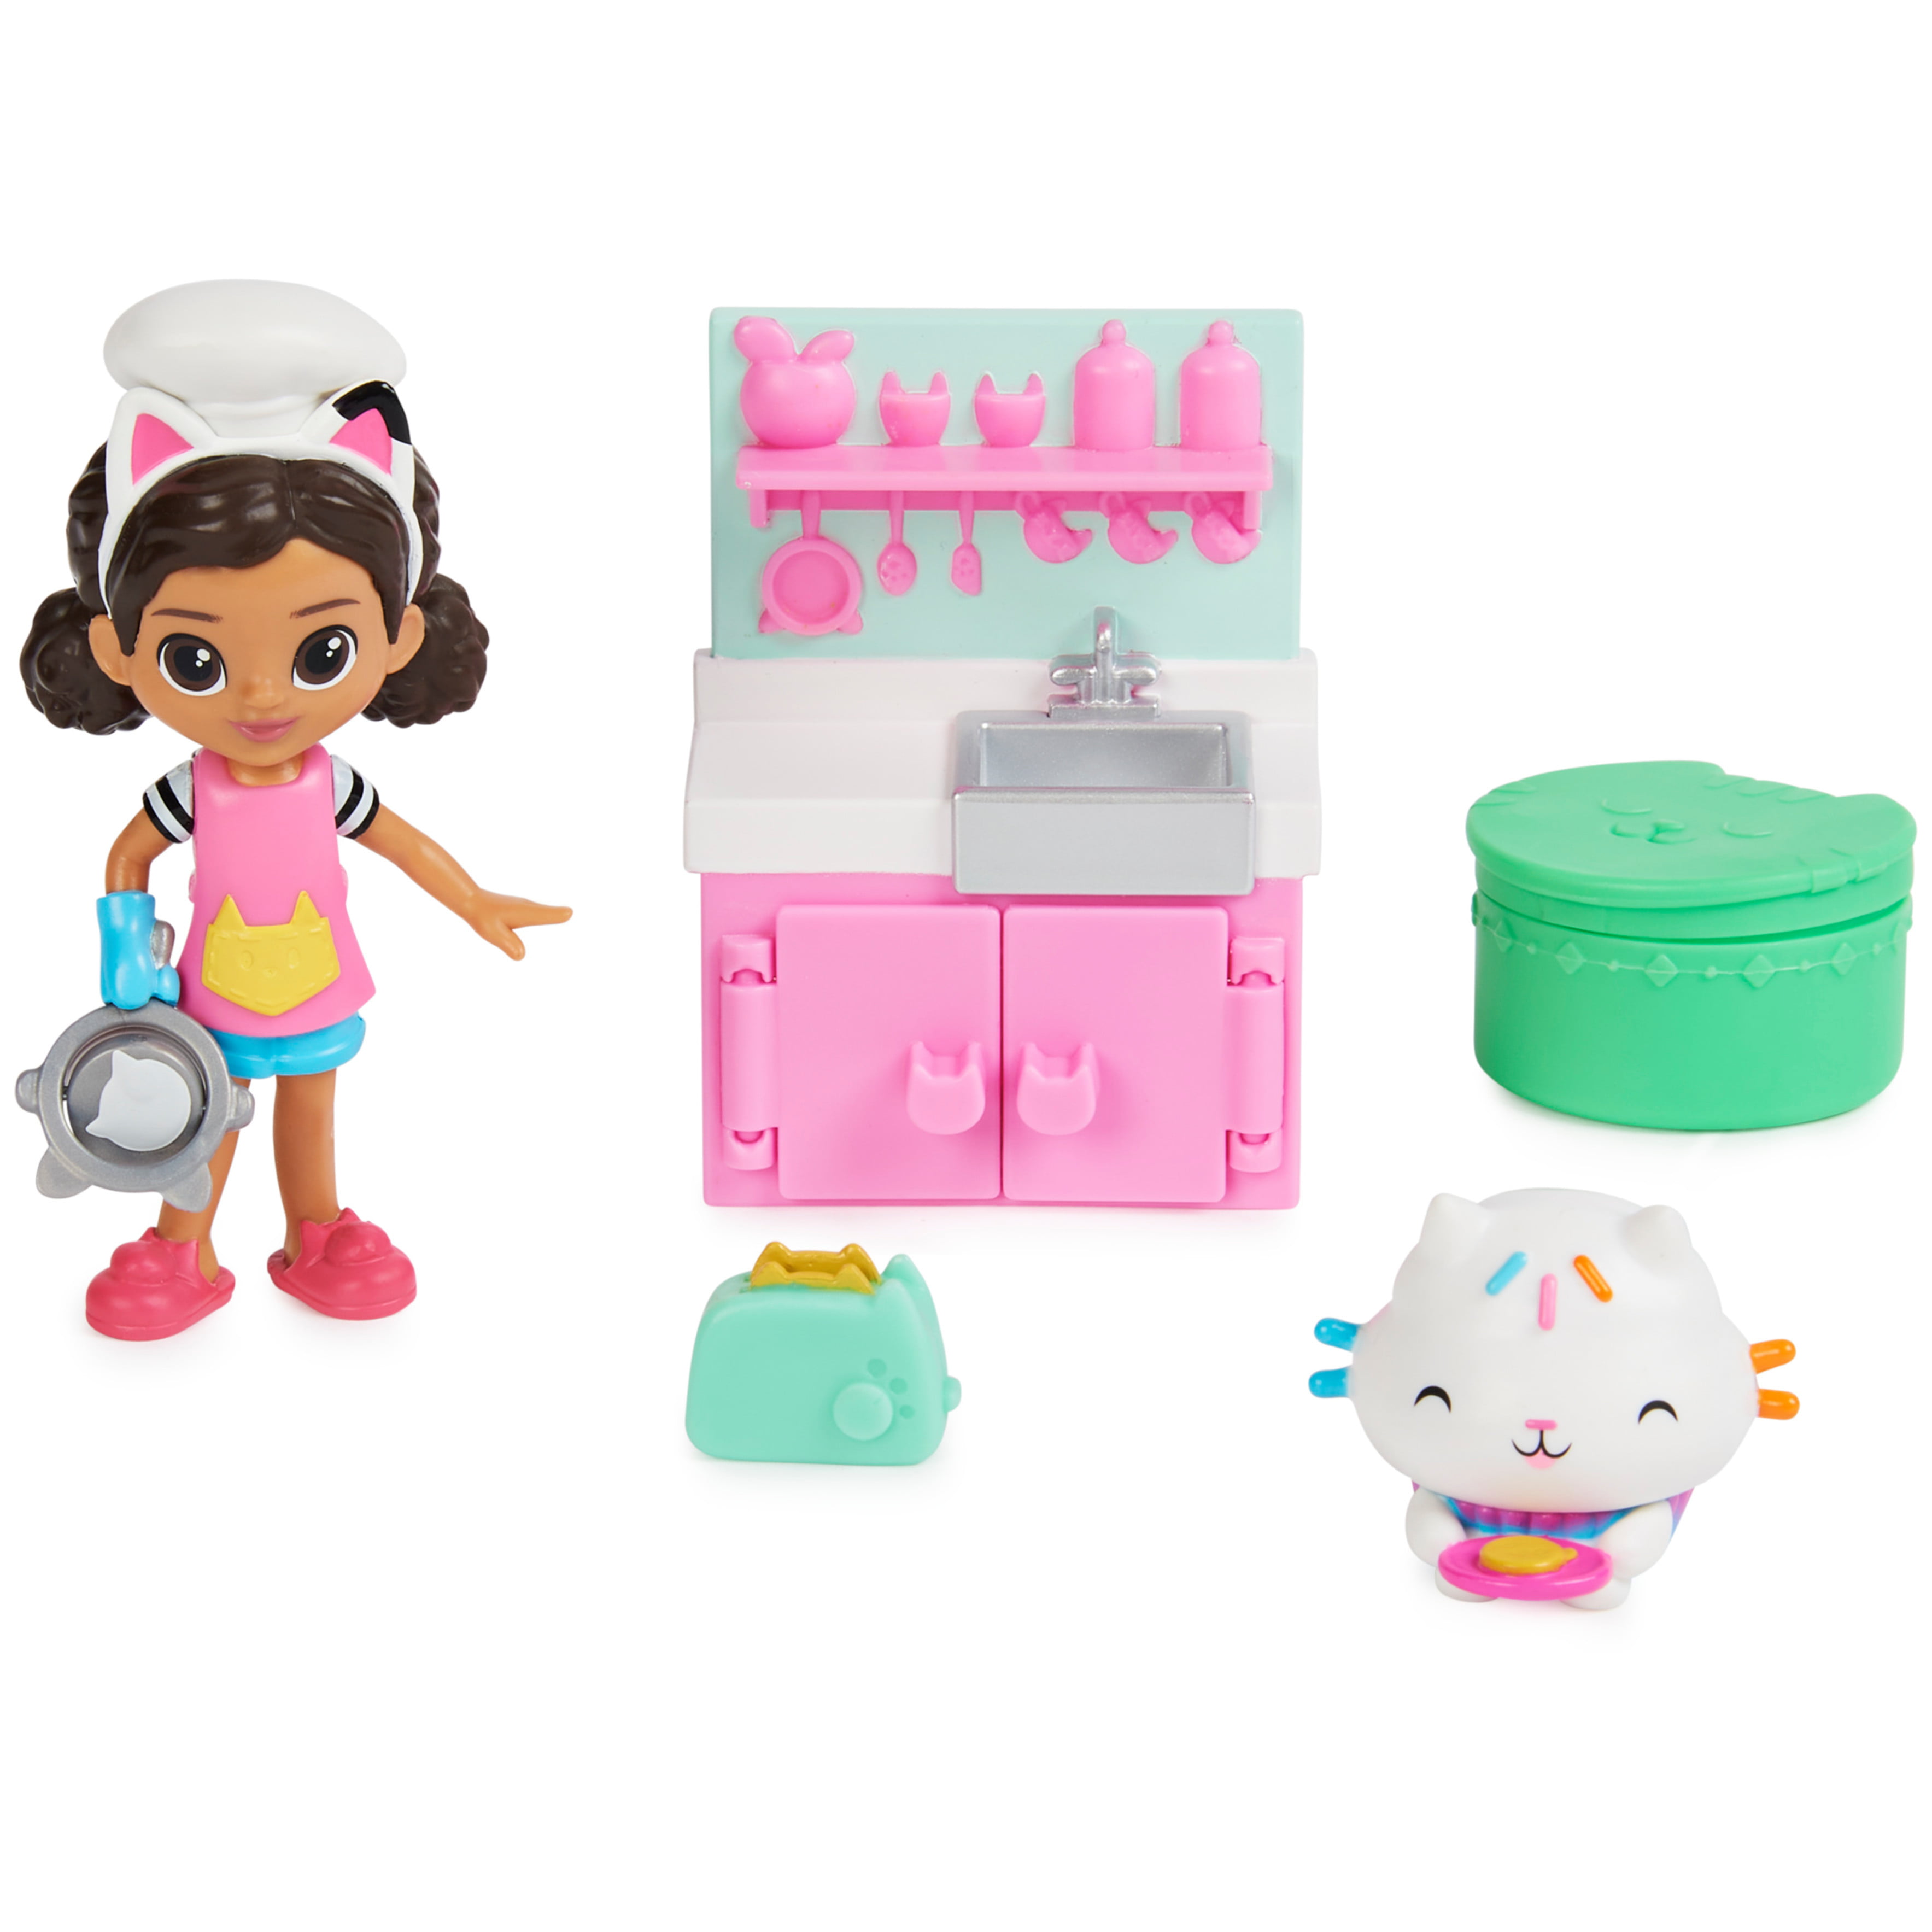 Gabbys Dollhouse, Lunch and Munch Kitchen Set with 2 Figures